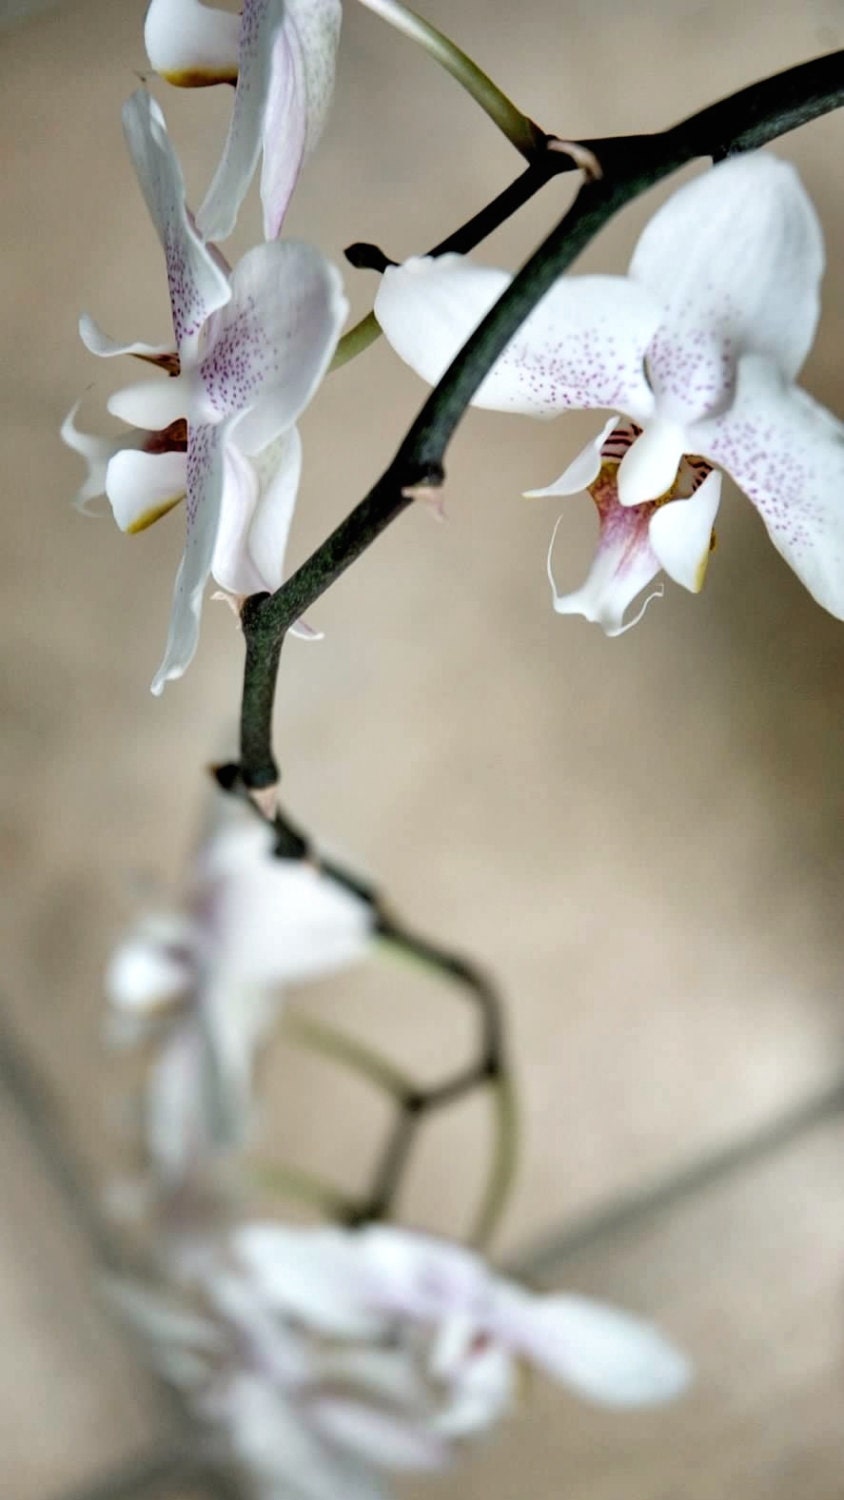 Orchid Study, 12x24in fine art print ready to frame, flower photography - PollenPictures